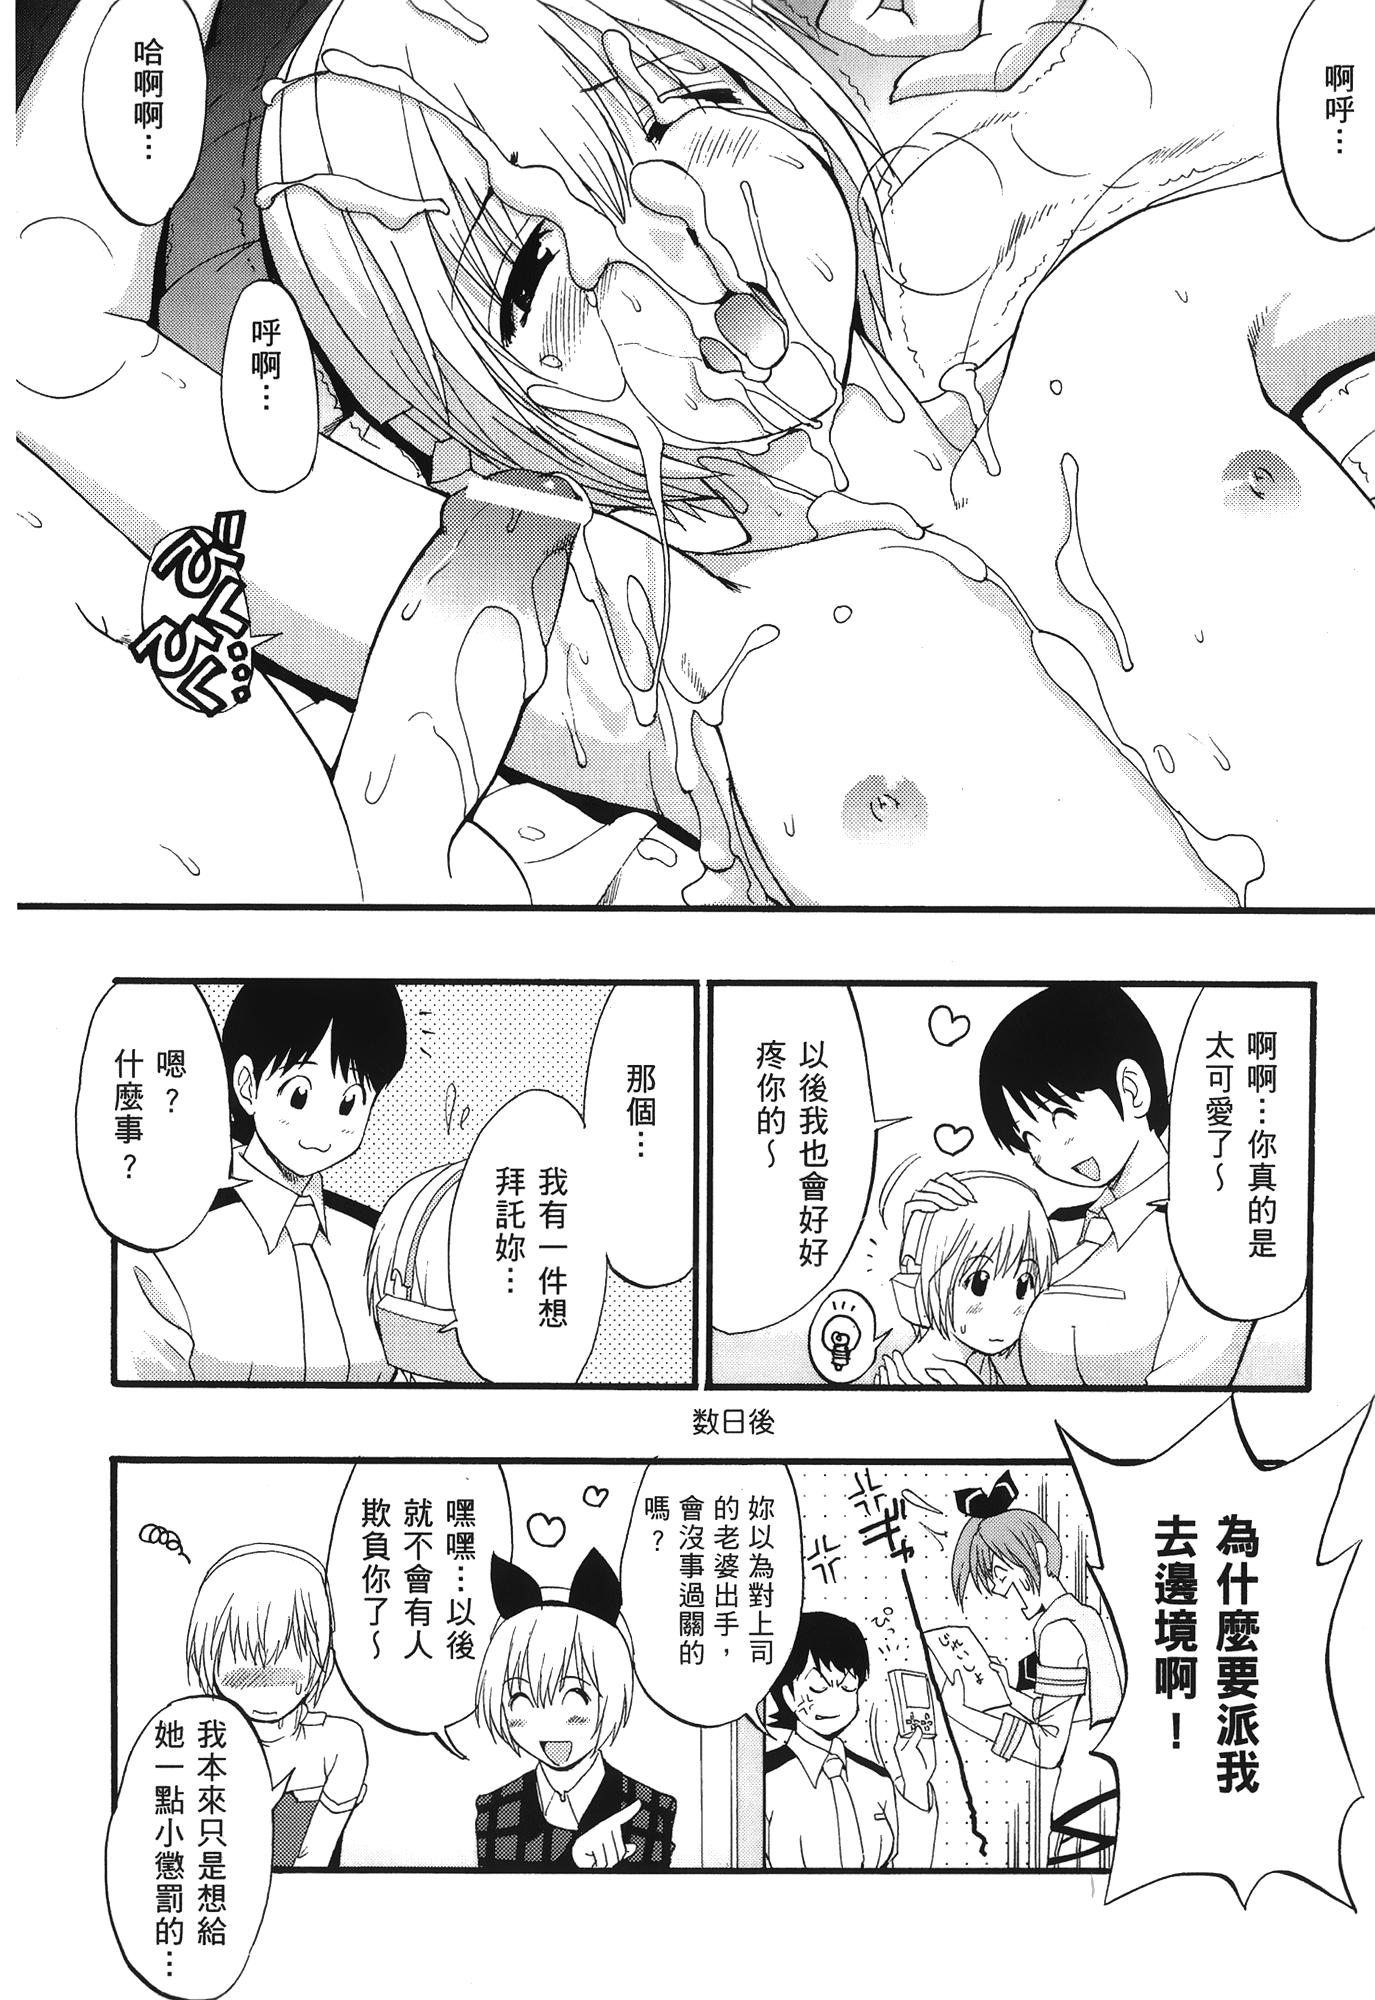 Hot [Saigado] THE YURI & FRIENDS 6 (King of Fighters) | 武鬥美少女 [Chinese] - King of fighters Casada - Page 159